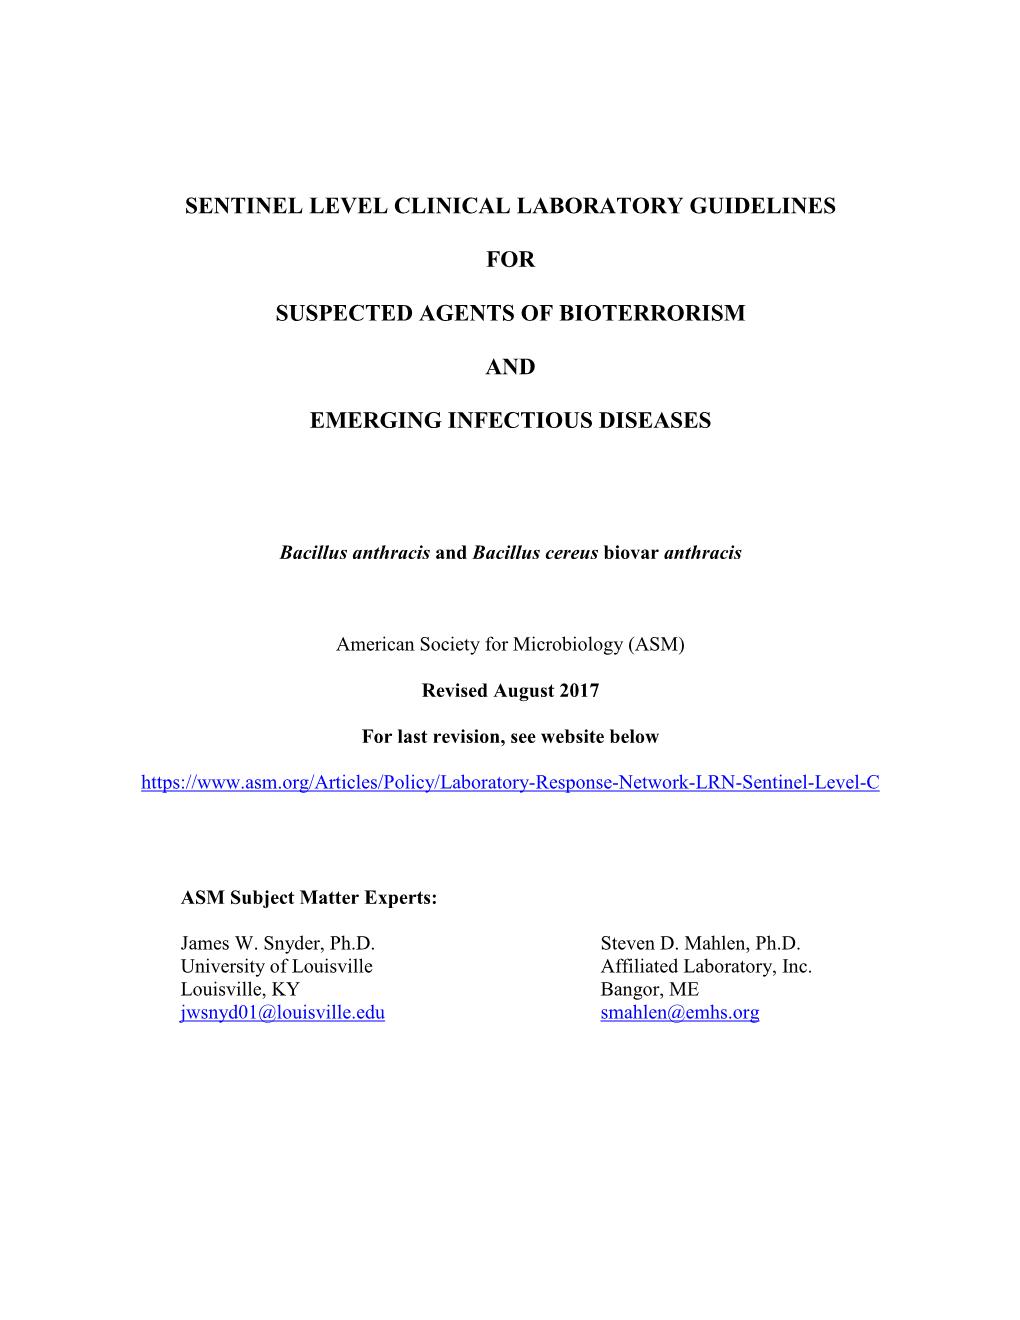 ASM Sentinel Level Clinical Laboratory Guideline for B. Anthracis